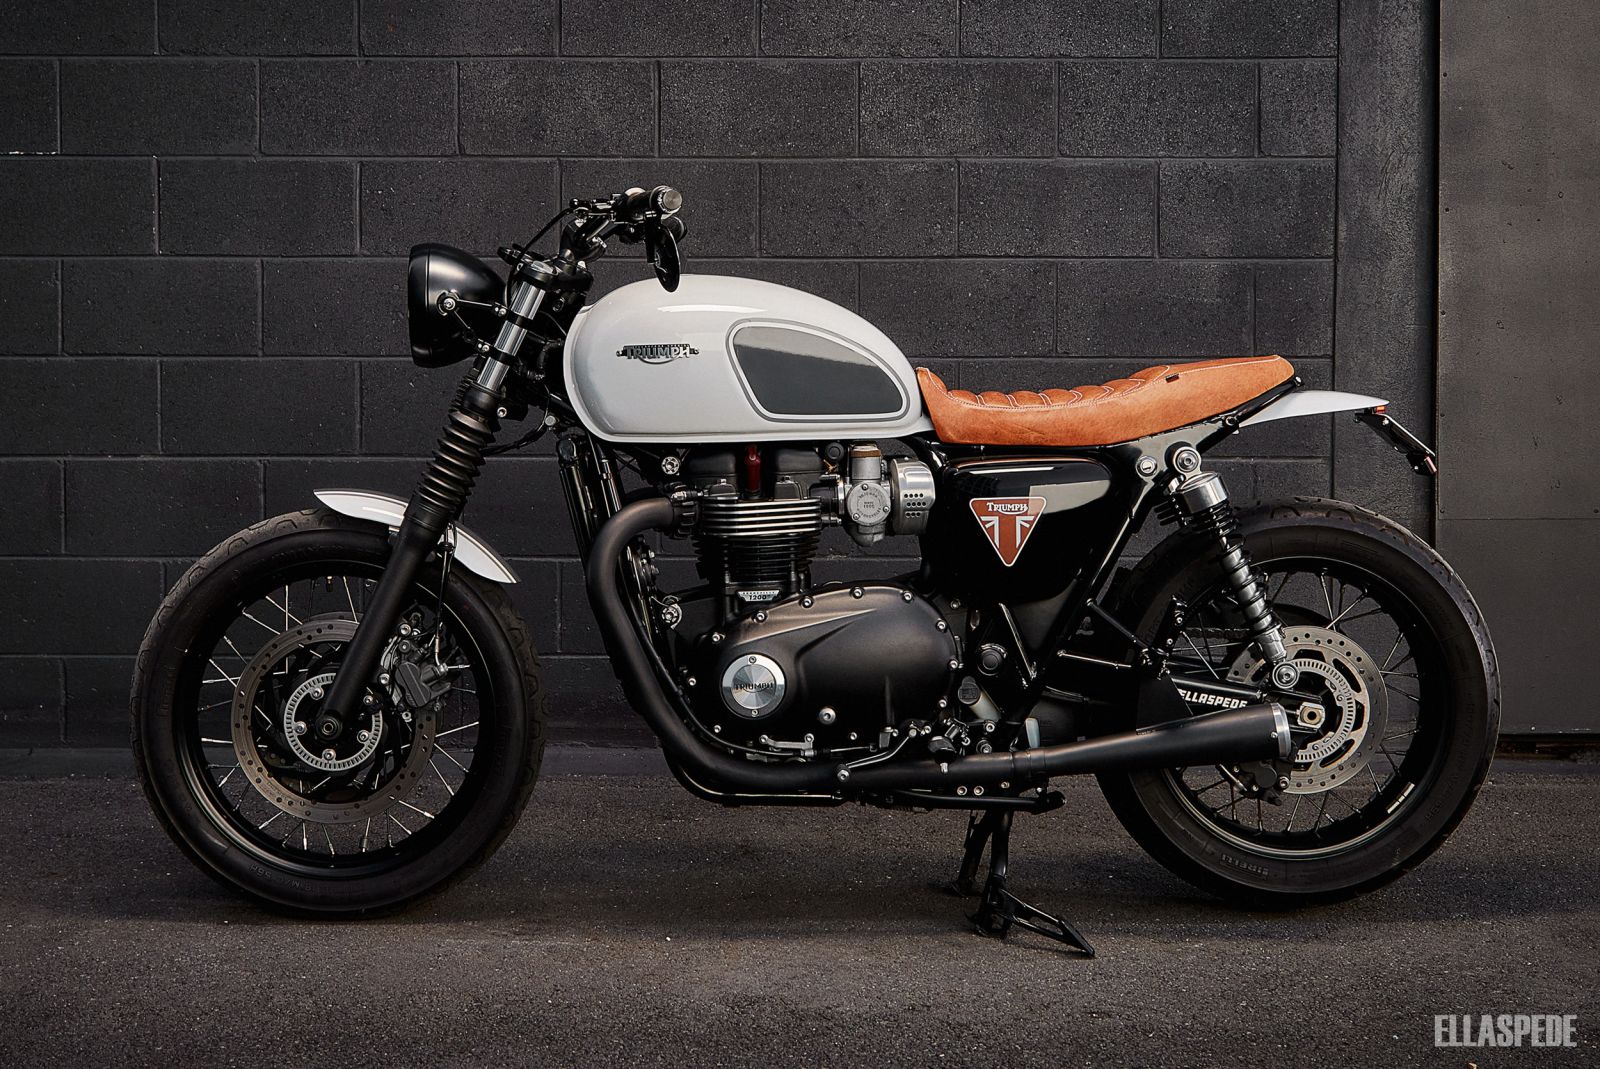 Who wants to win this Triumph Bonneville restomod?